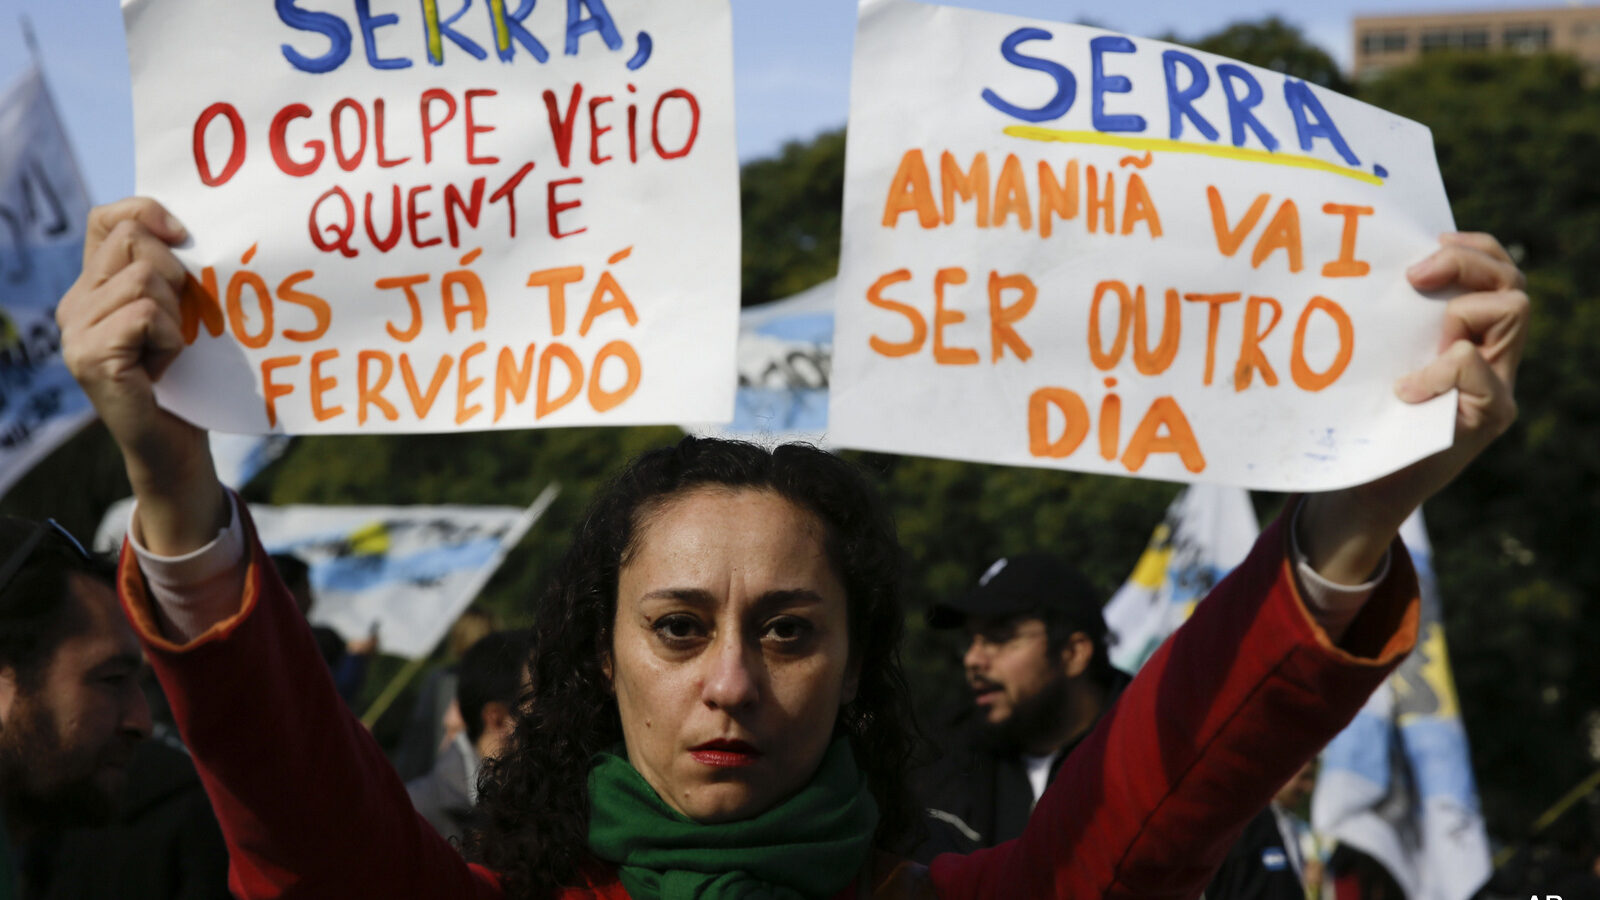 A woman holds up signs that say in Portuguese "Serra, the coup is hot, we're already boiling," left, and "Serra, tomorrow will be another day" as protesters wait for him outside the Foreign Relations Ministry where he'll meet Argentina's Foreign Minister Susana Malcorra in Buenos Aires, Argentina, Monday, May 23, 2016. Serra is on his first state visit since being appointed in the wake of Brazilian President Dilma Rousseff's impeachment. (AP Photo/Natacha Pisarenko)